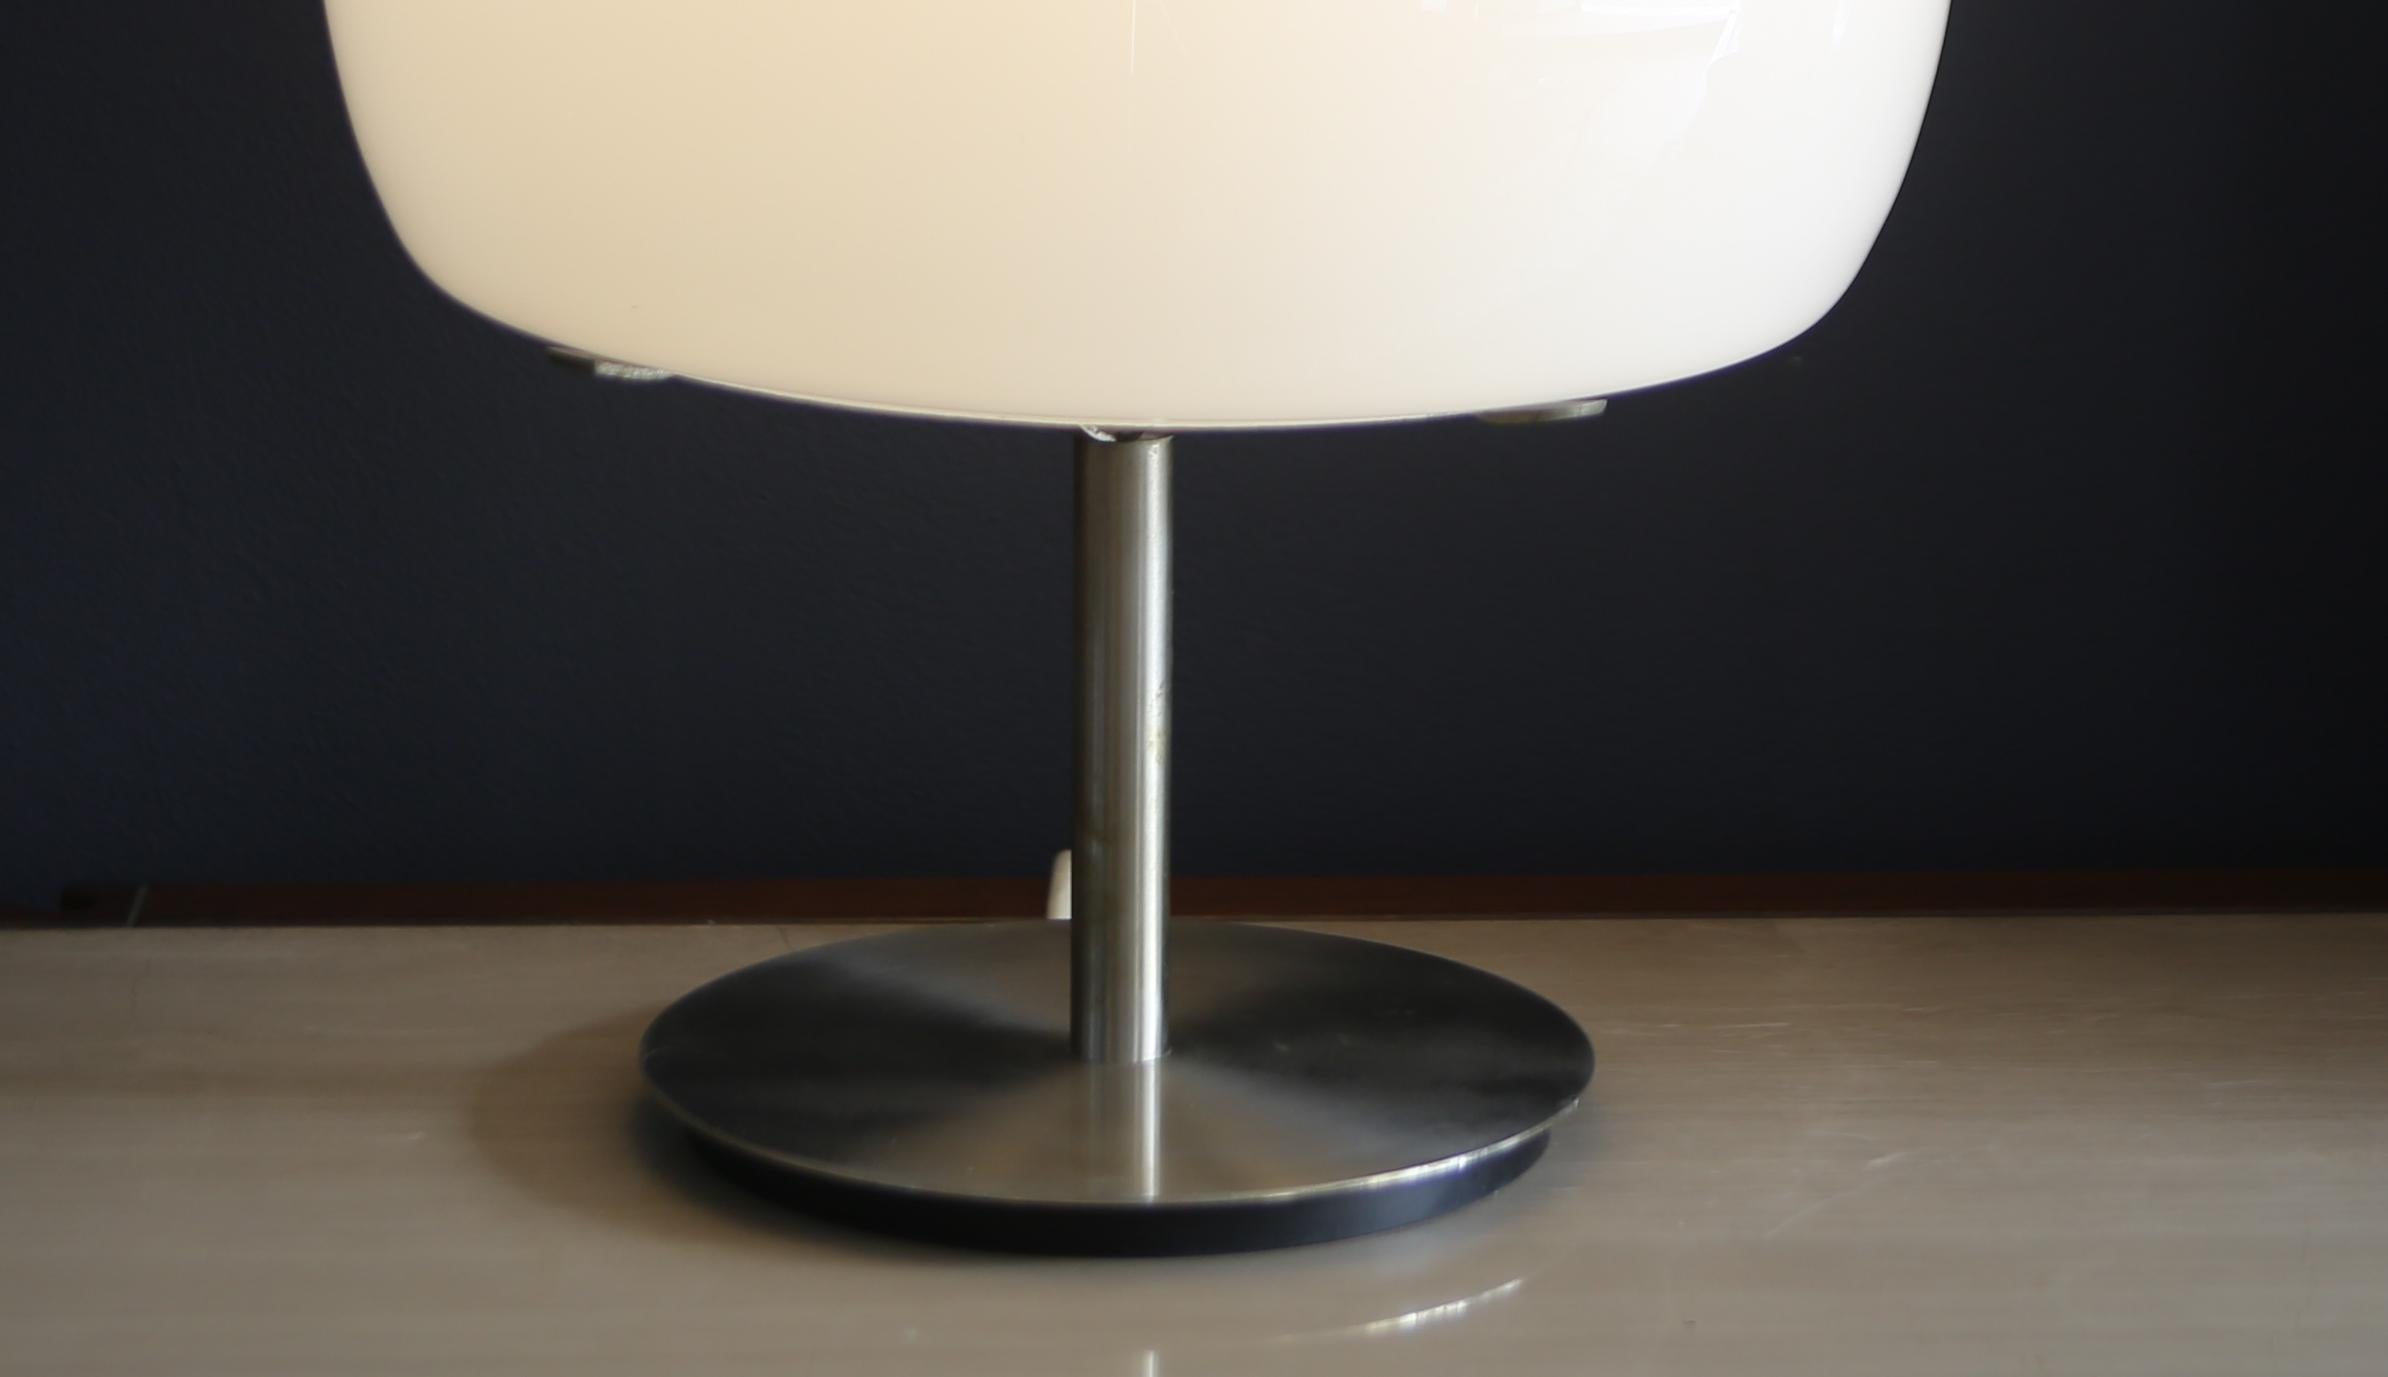 Other 'Erse' Table Lamp by Vico Magistretti for Artemide 1964 For Sale